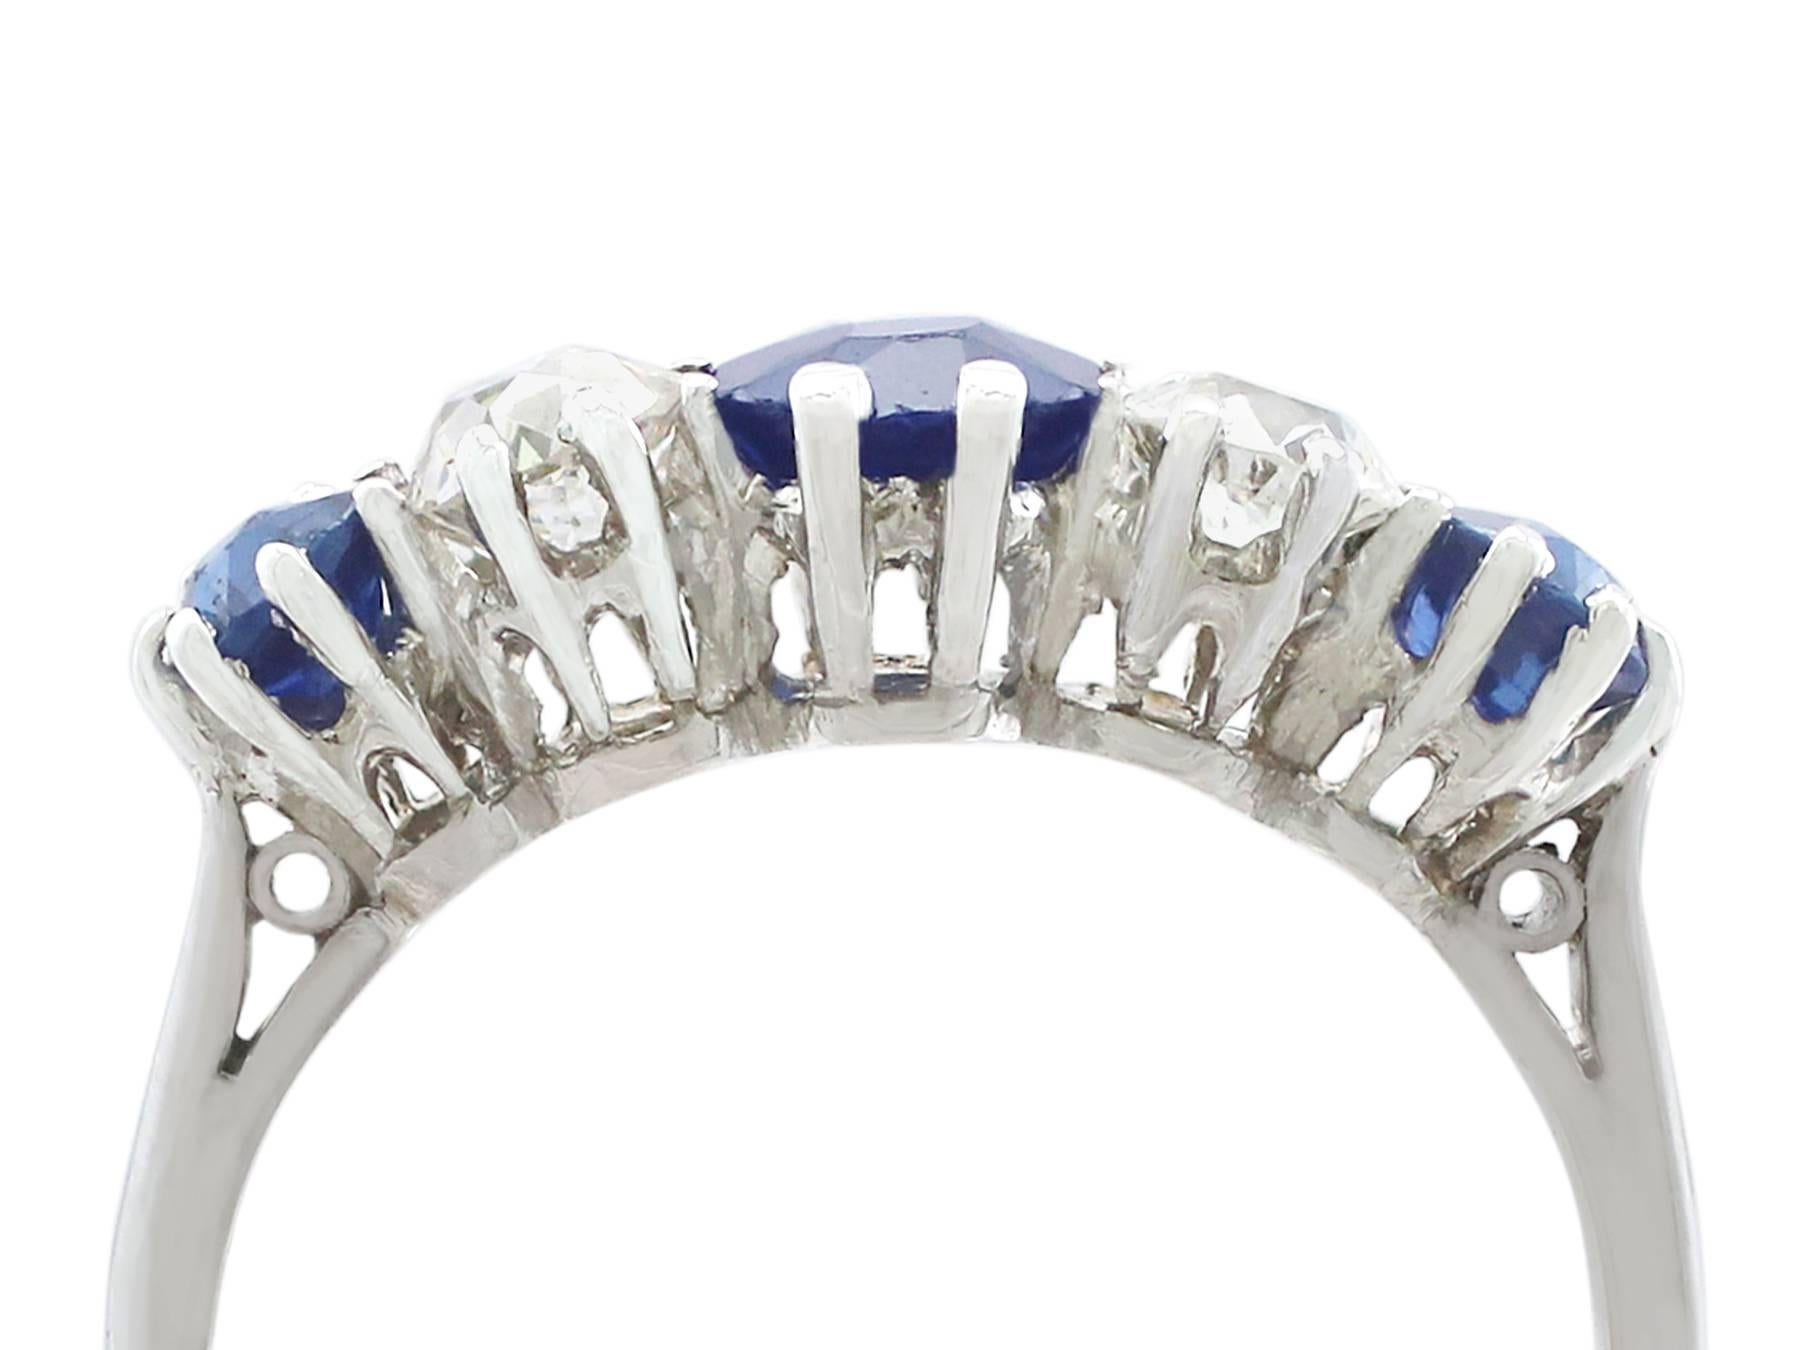 An impressive antique 0.90 carat blue sapphire and 0.55 carat diamond, platinum five stone dress ring; part of our diverse antique jewelry and estate jewelry collections.

This fine and impressive five stone diamond and sapphire ring has been